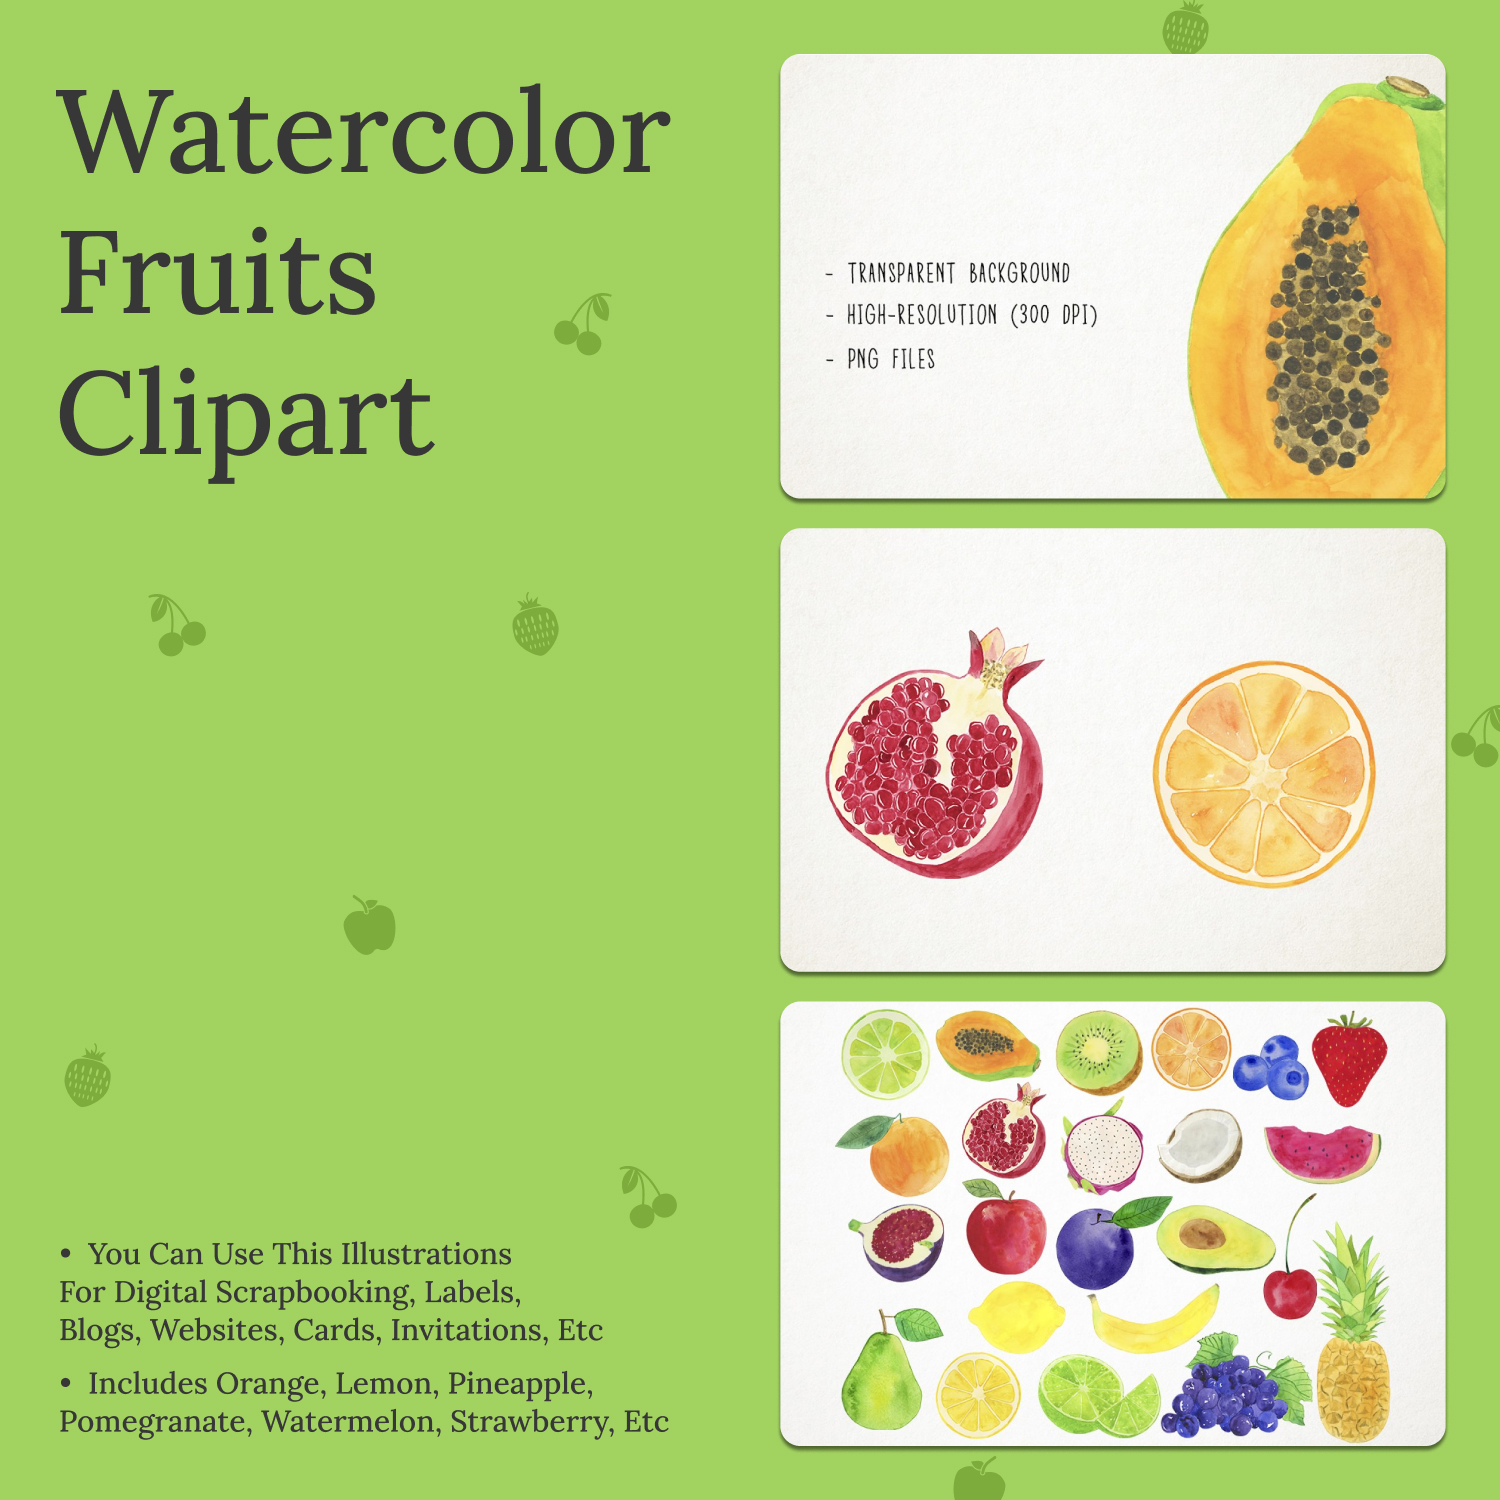 Watercolor fruits clipart preview.